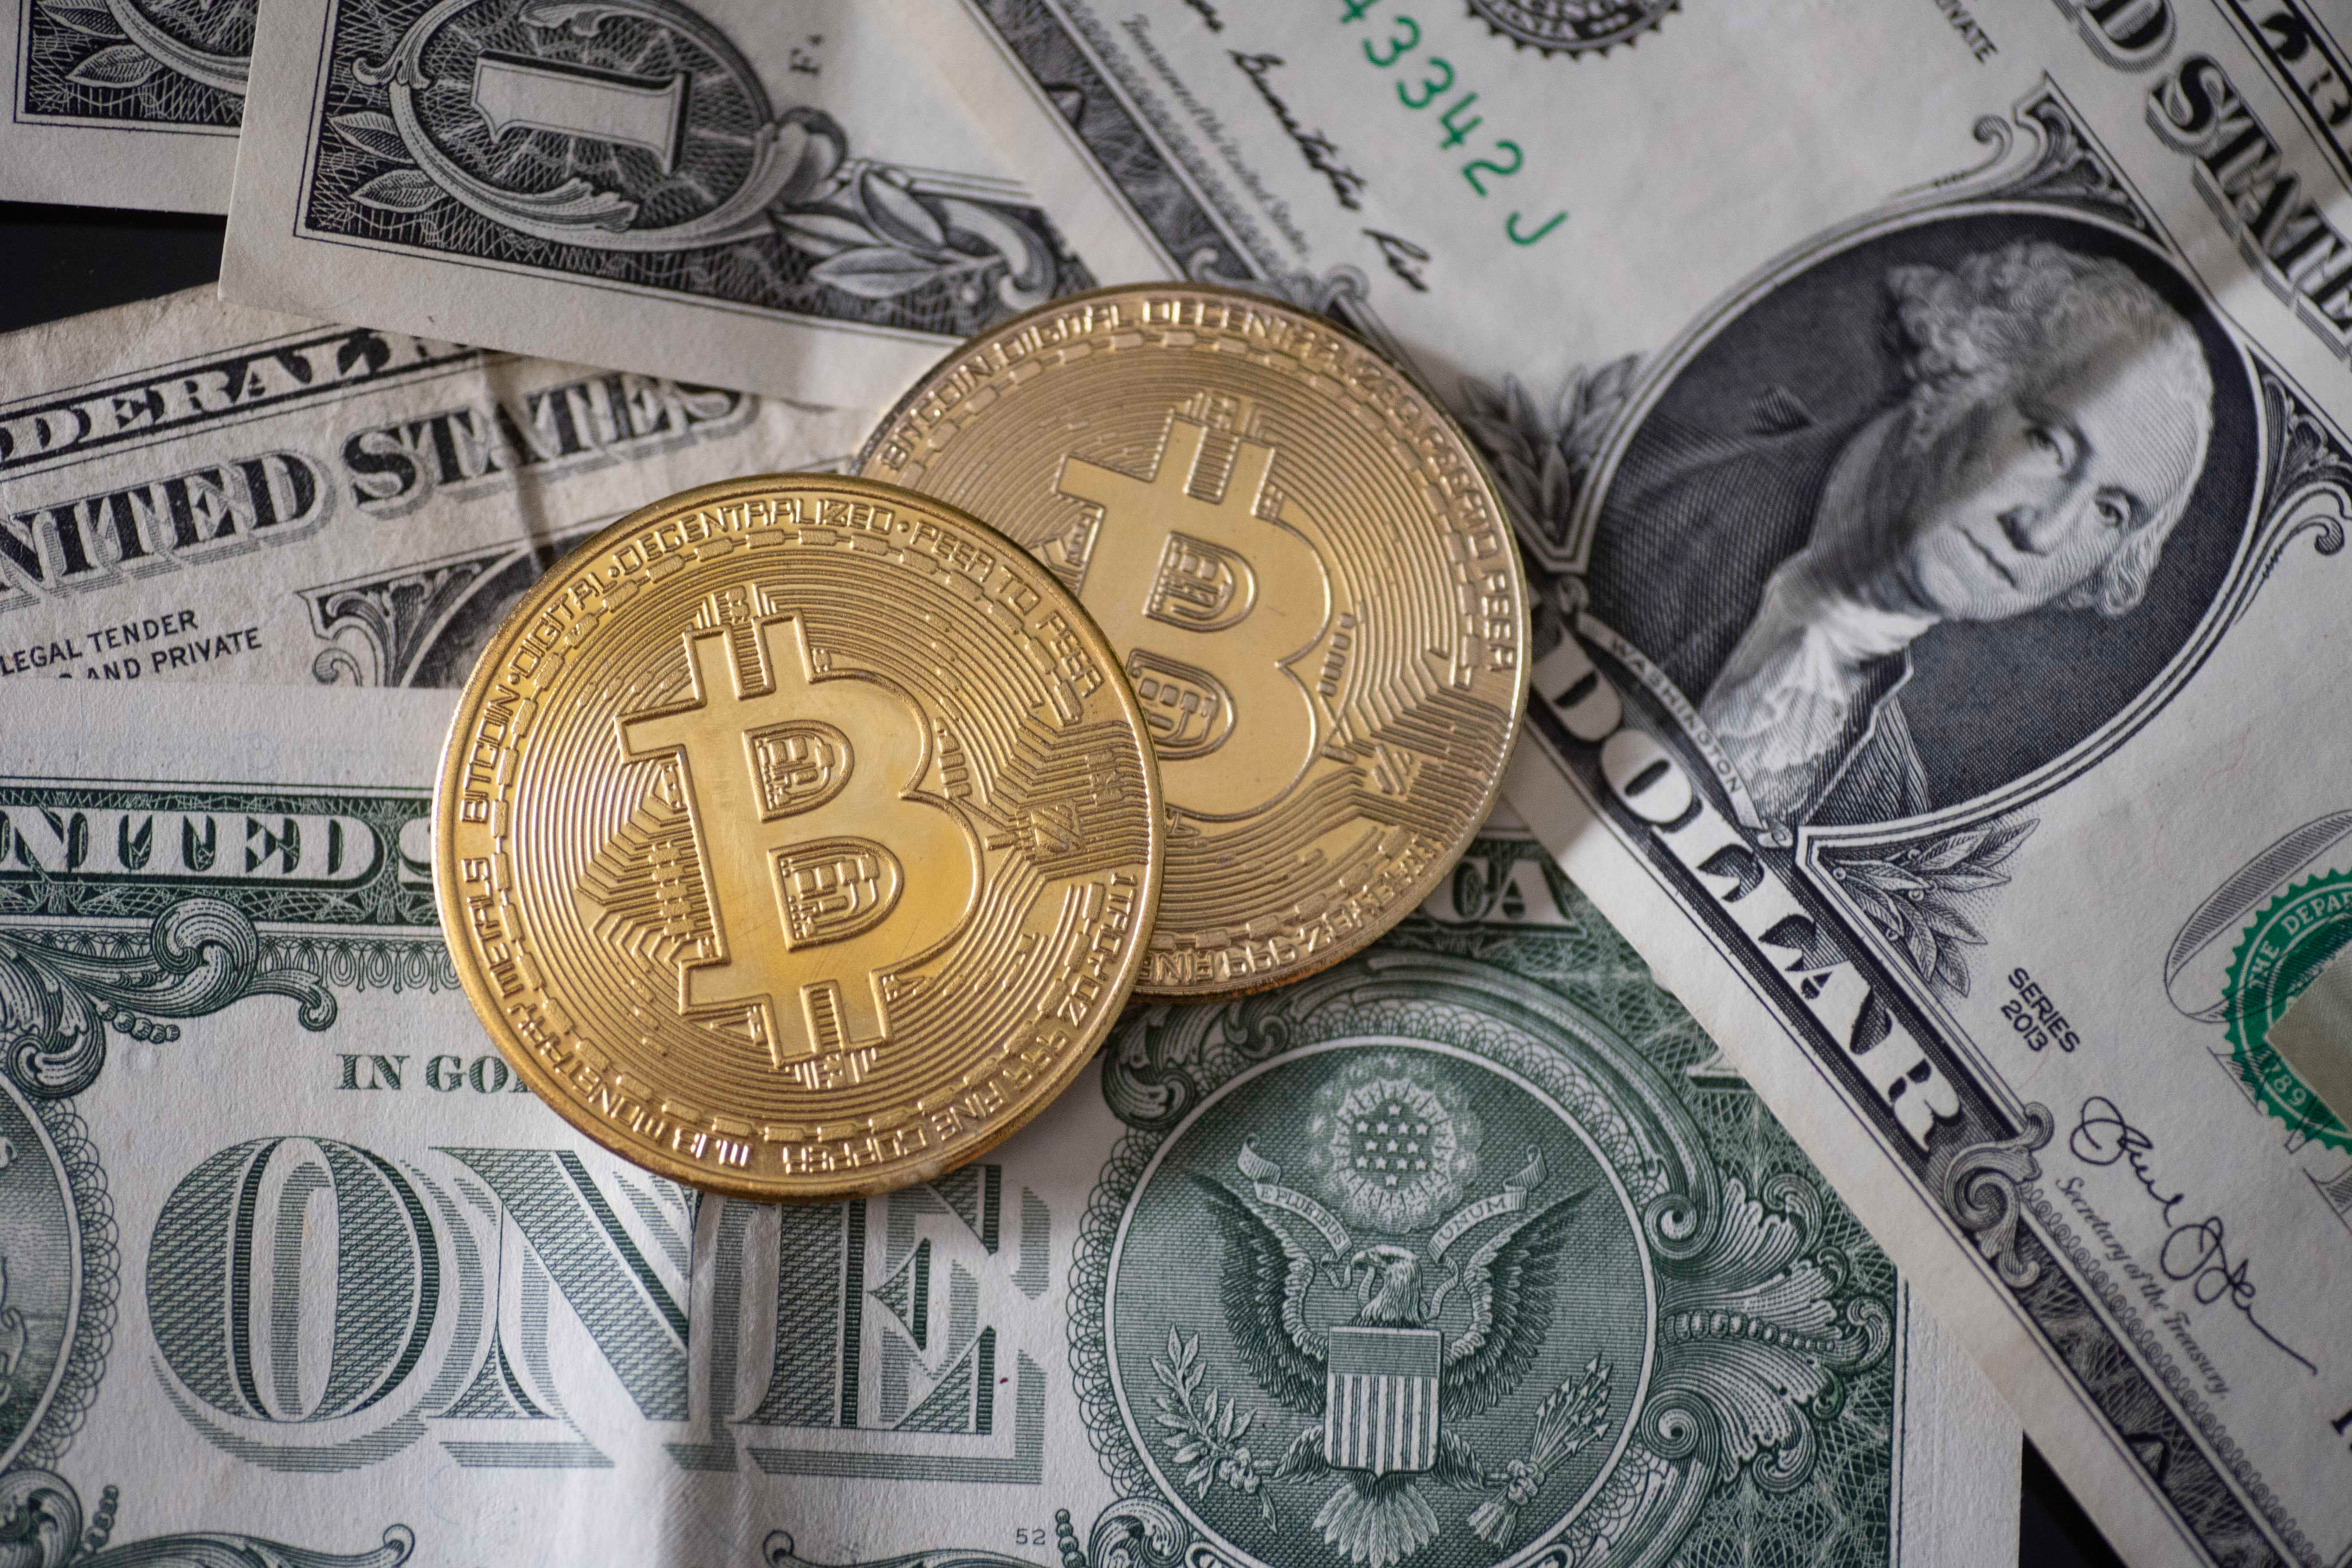 Bitcoin is cratering, again. What investors should keep in mind